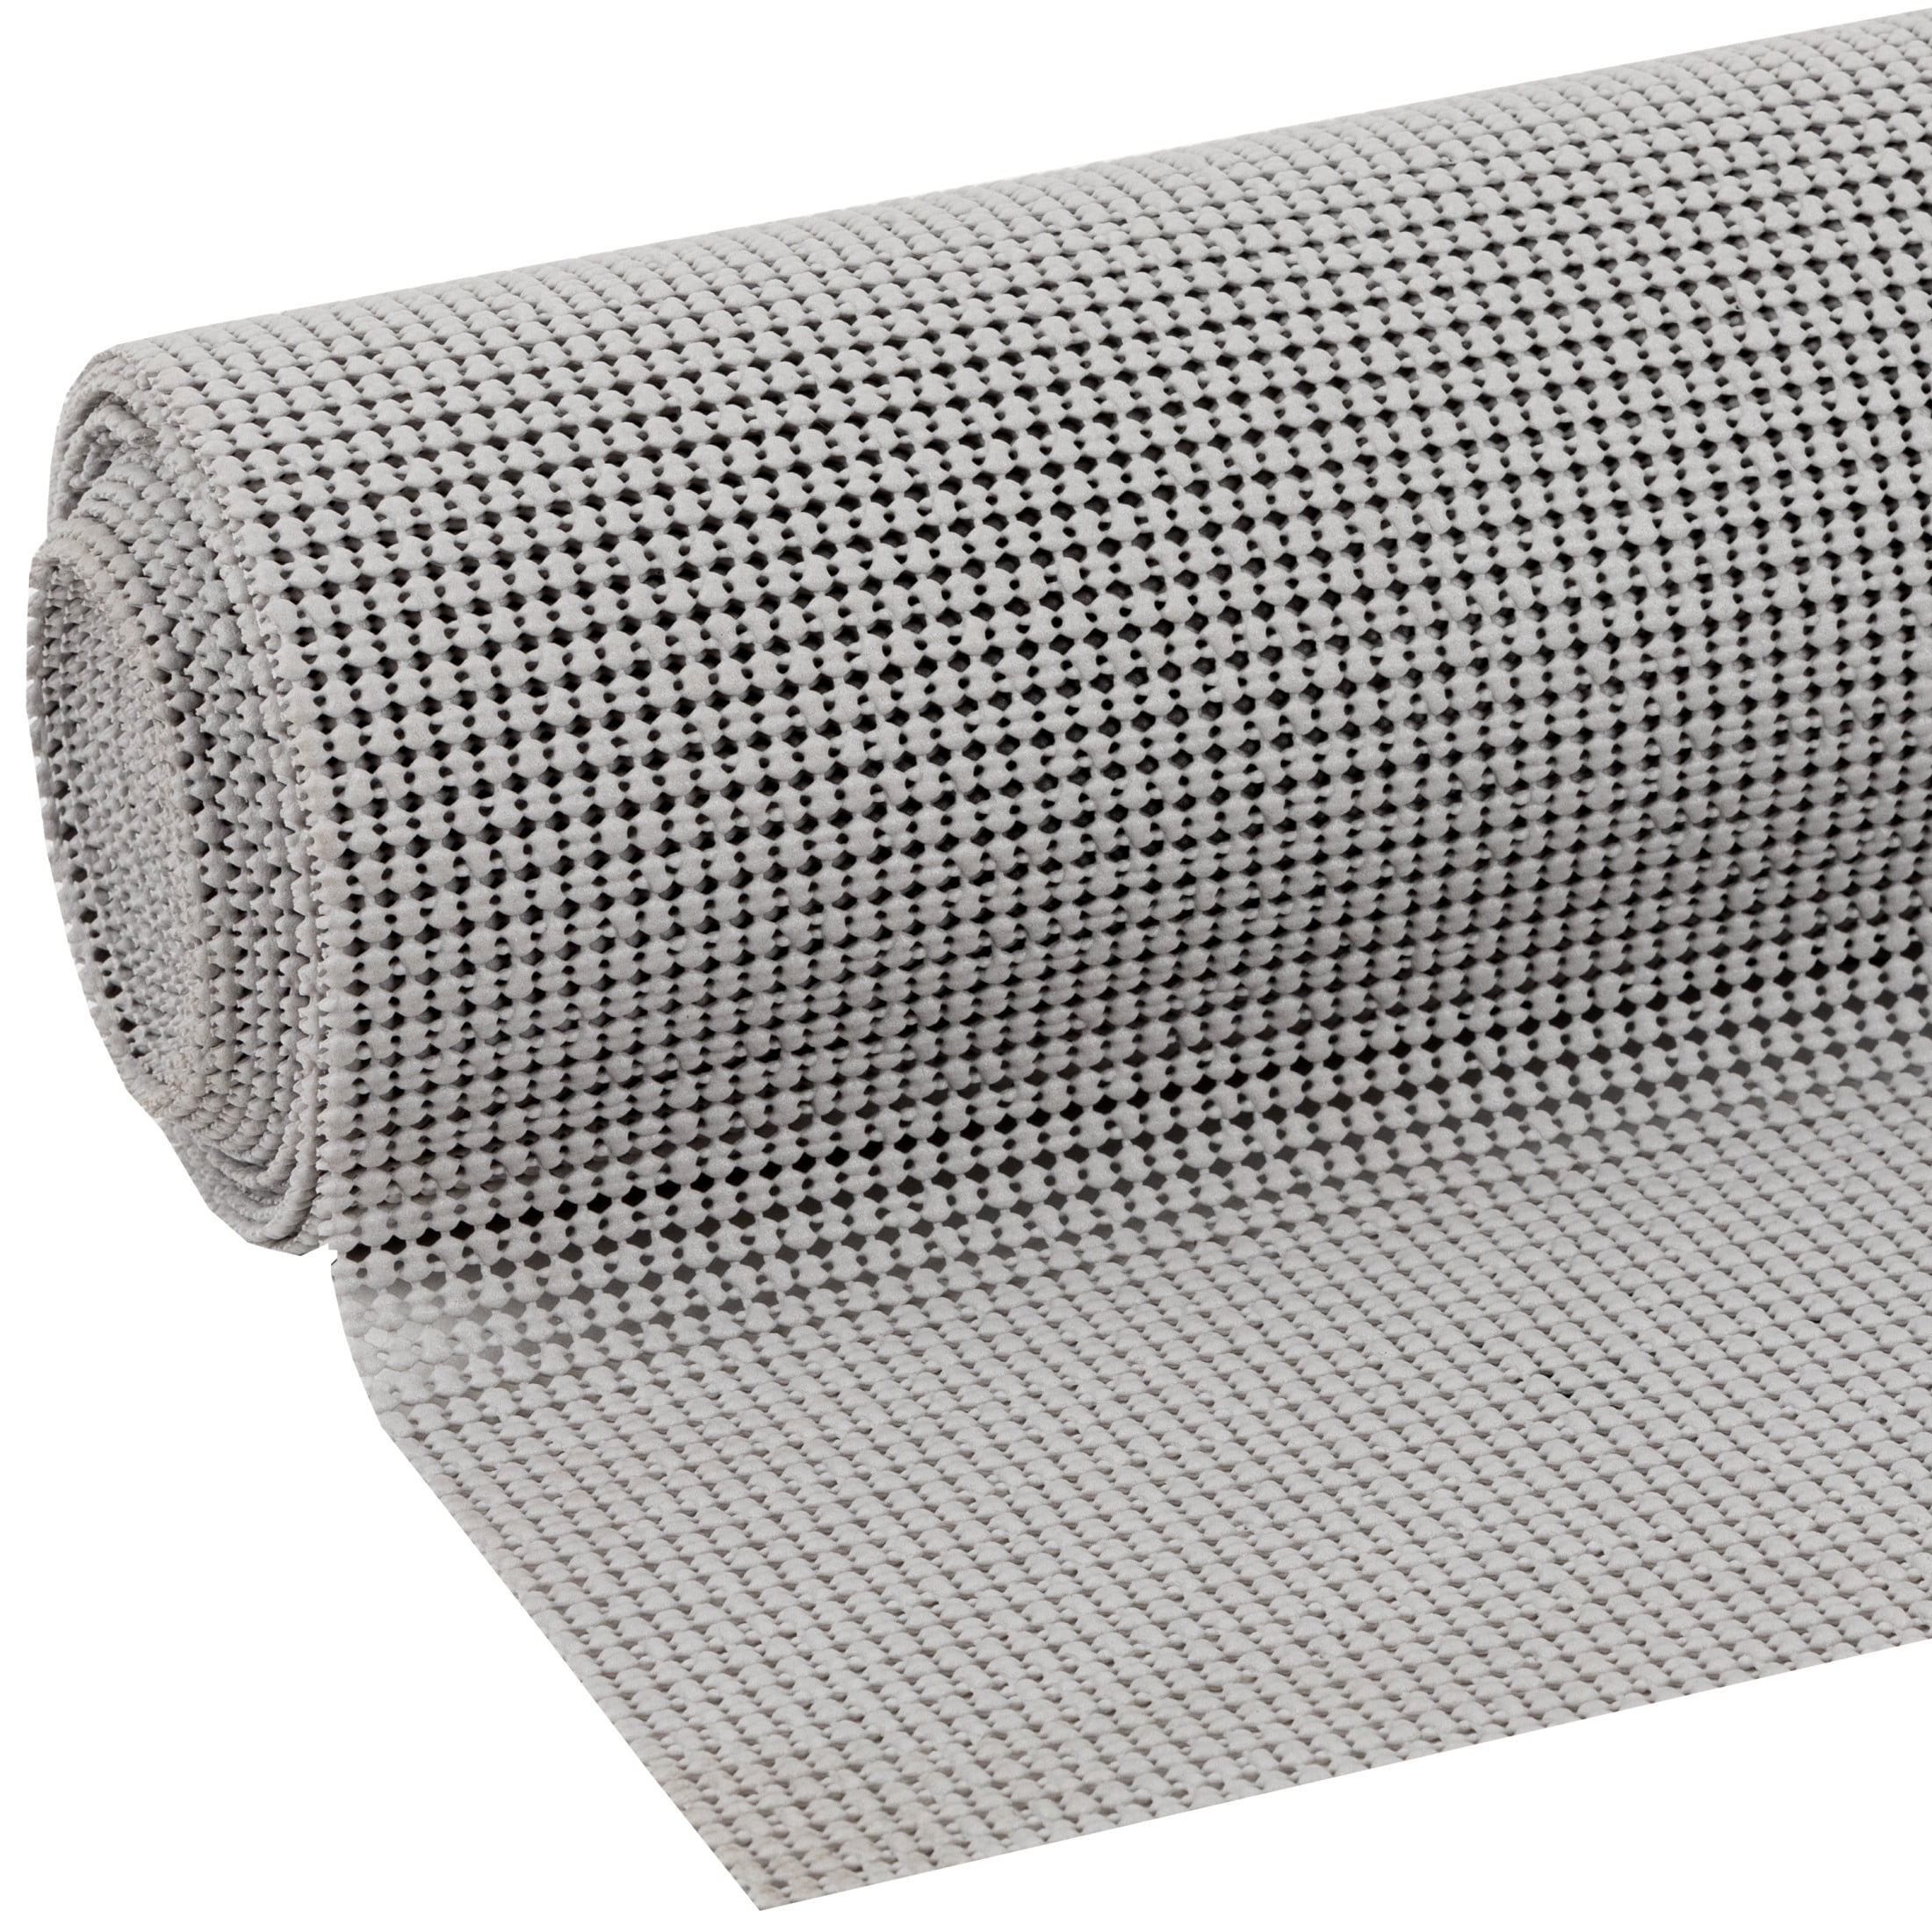 ACSTEP Cabinet Liners 17.5 in. x 30 ft, Shelf Liners for Kitchen,Cabinets  Contact Paper, Labyrinthine, White& Black 